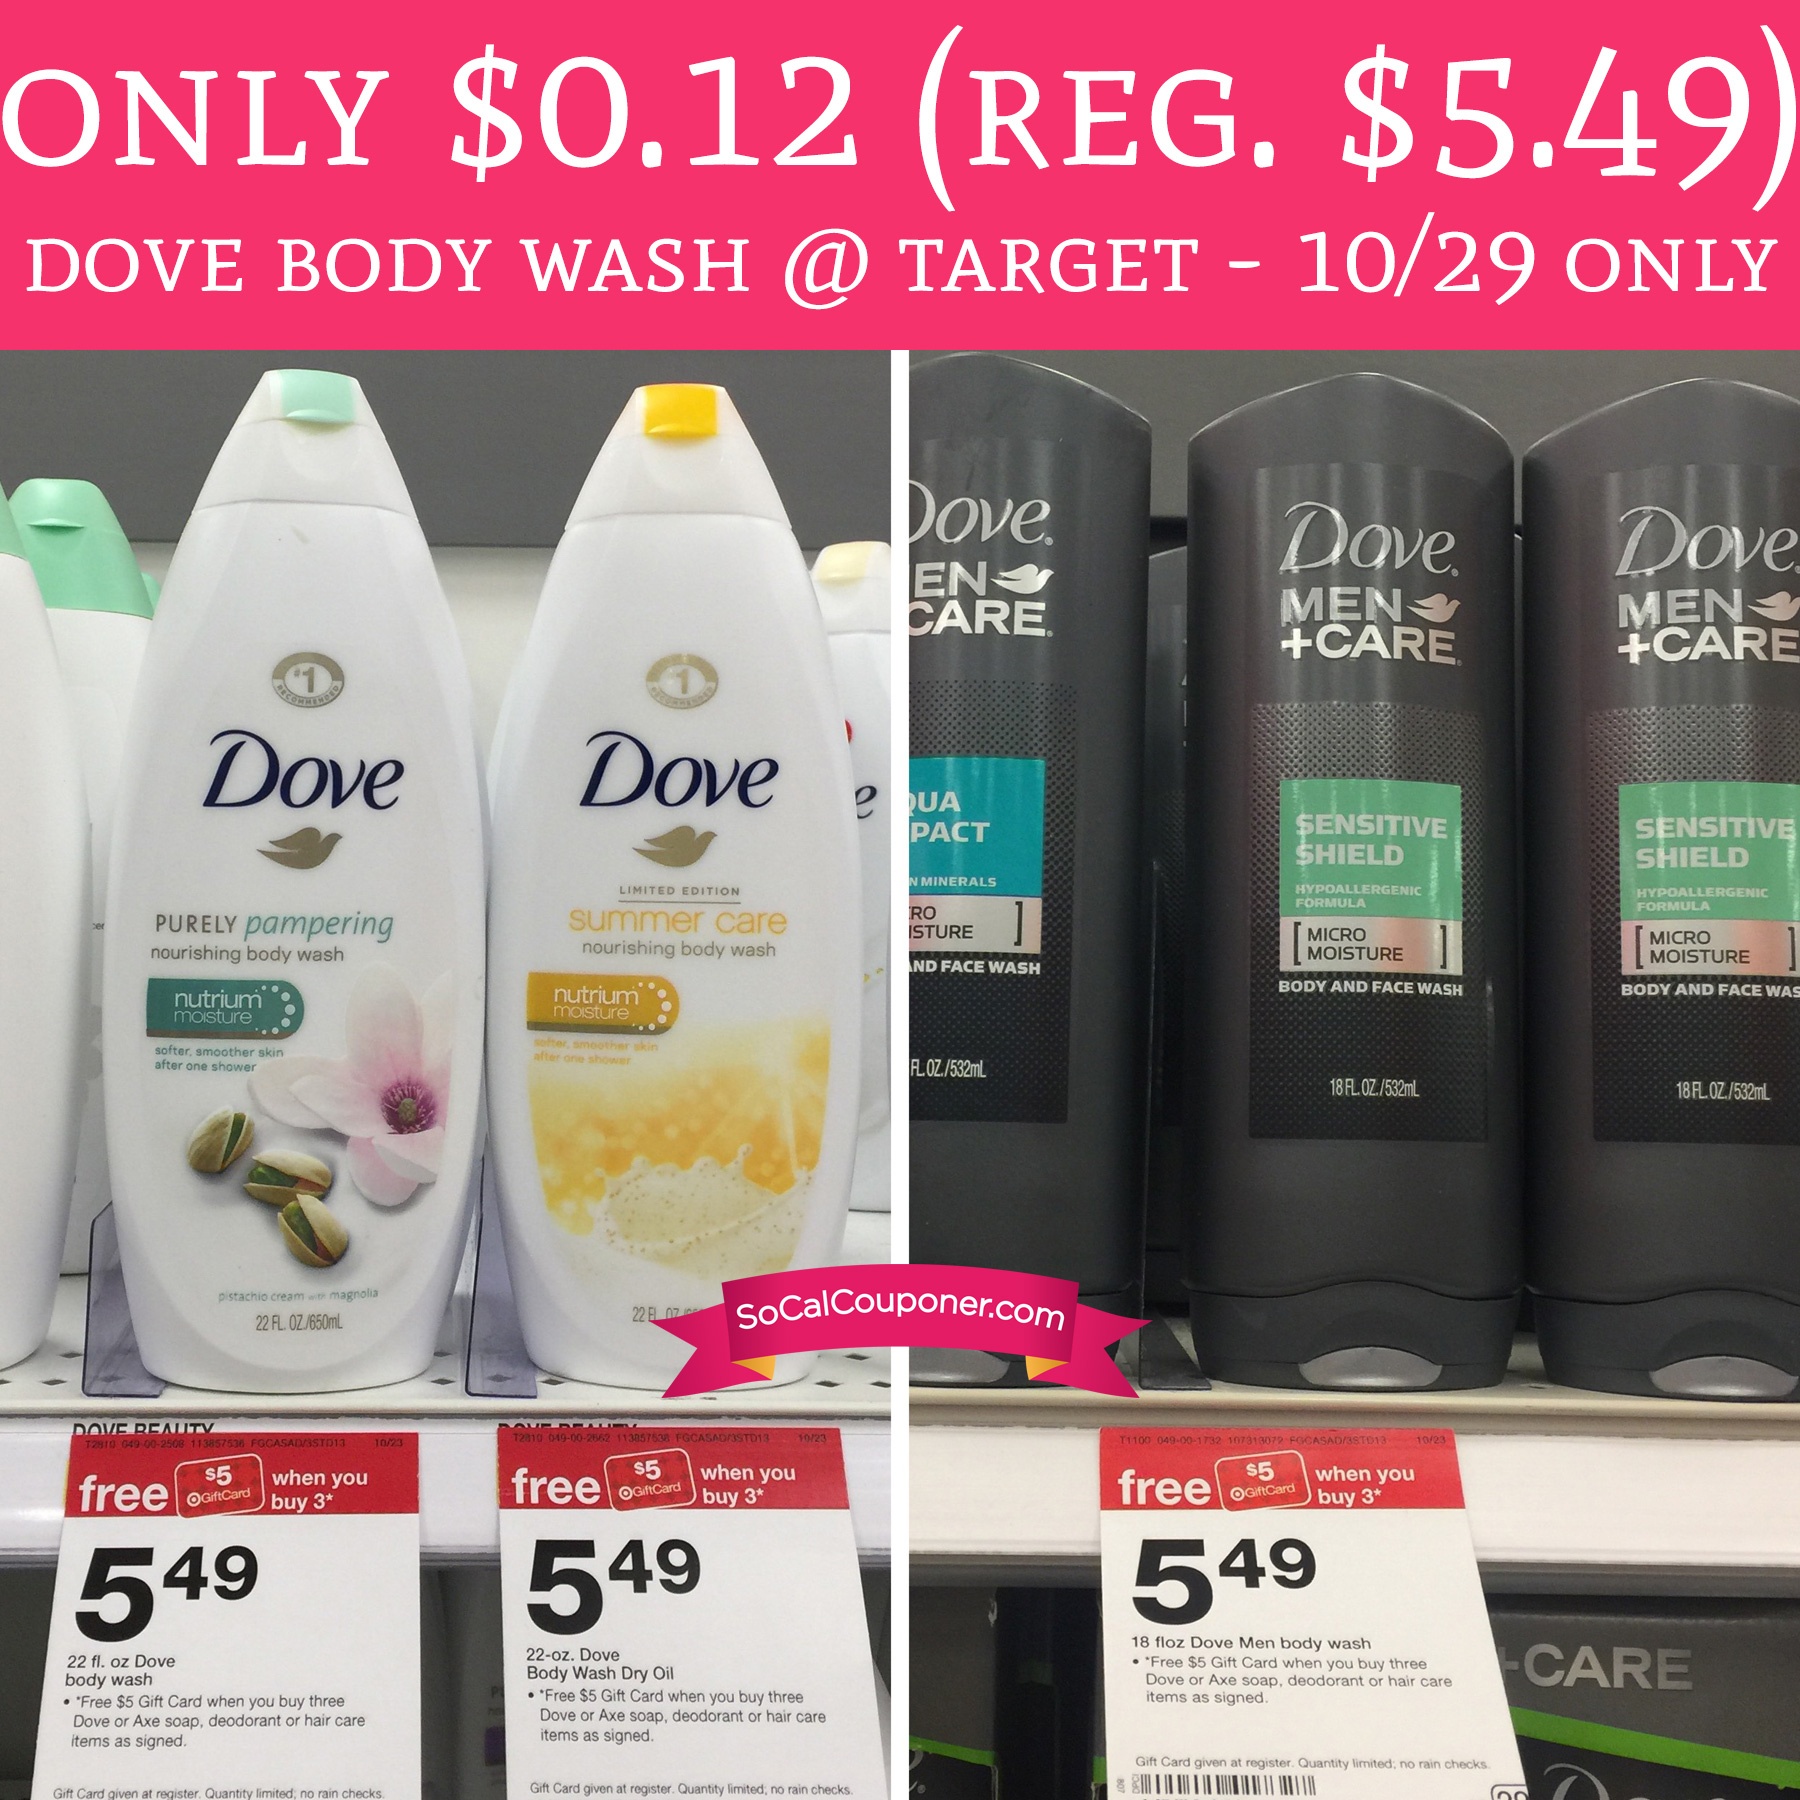 Dove Body Wash Coupon Deal / How To Get Multiple Coupon Inserts For Free - Free Dove Soap Coupons Printable